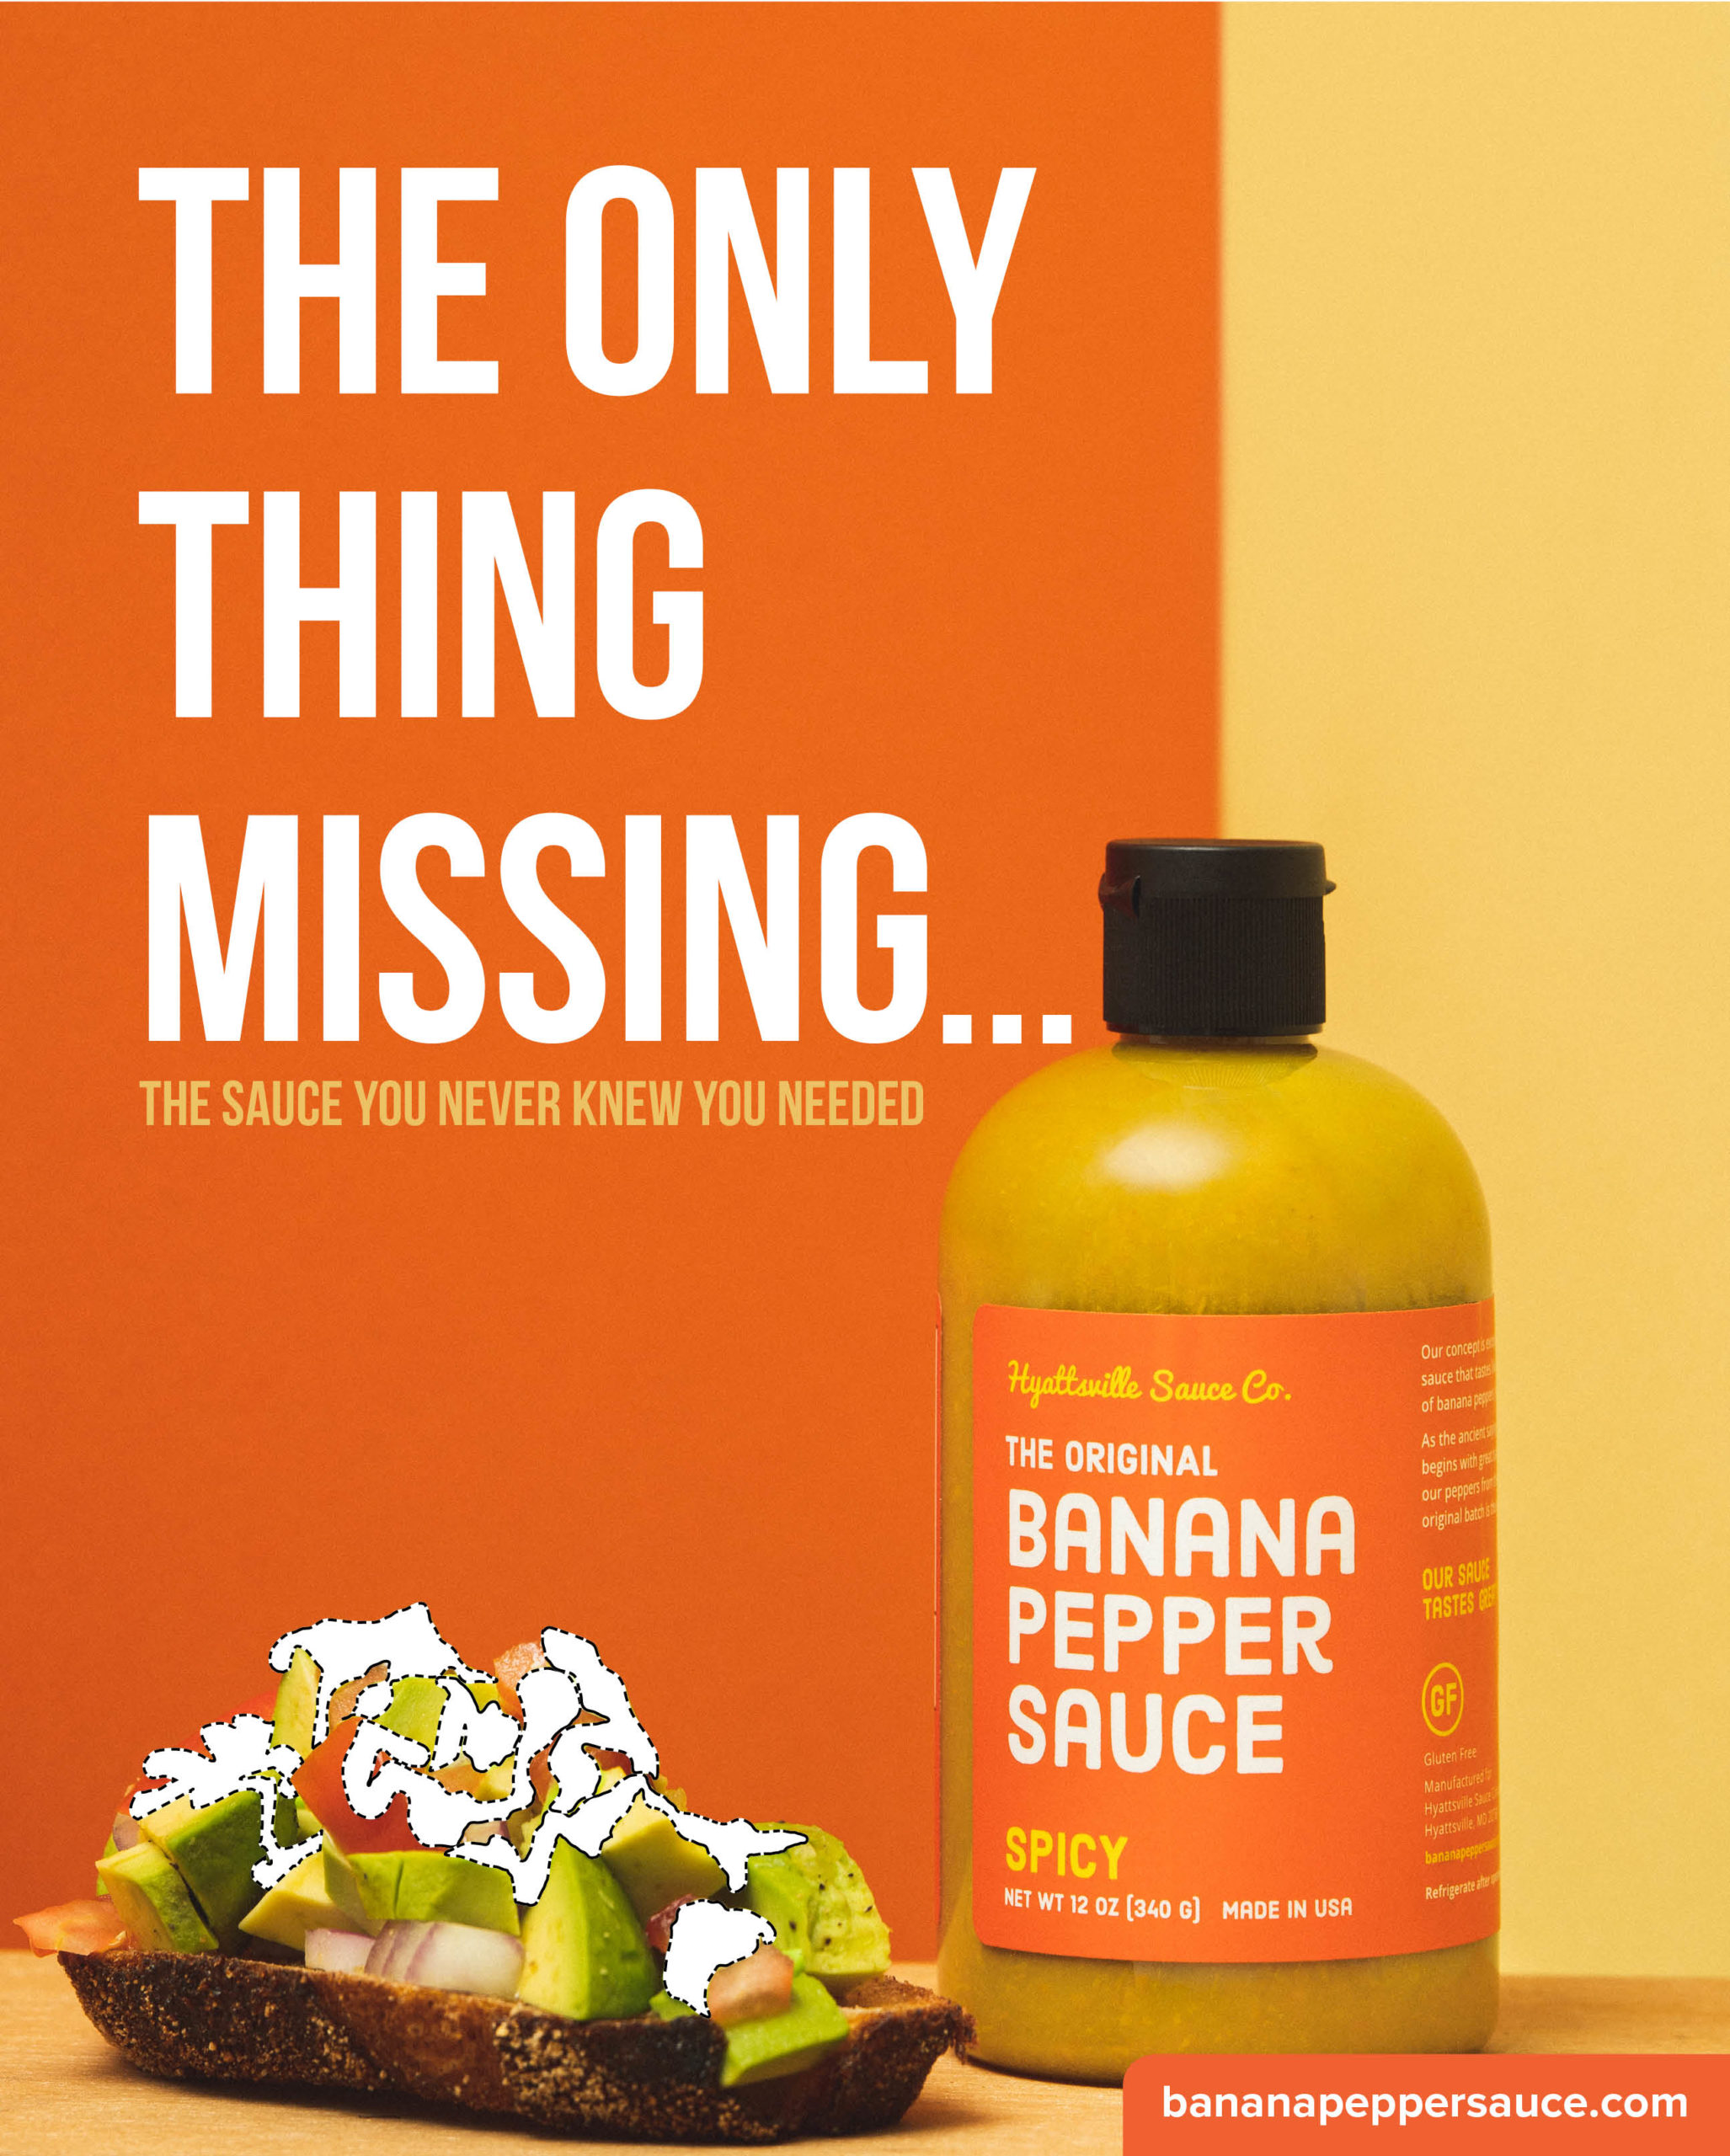 Hyattsville Sauce Company The Original Banana Pepper Sauce bottle Spicy flavor next to avocado on bread graphic with slogan and website address